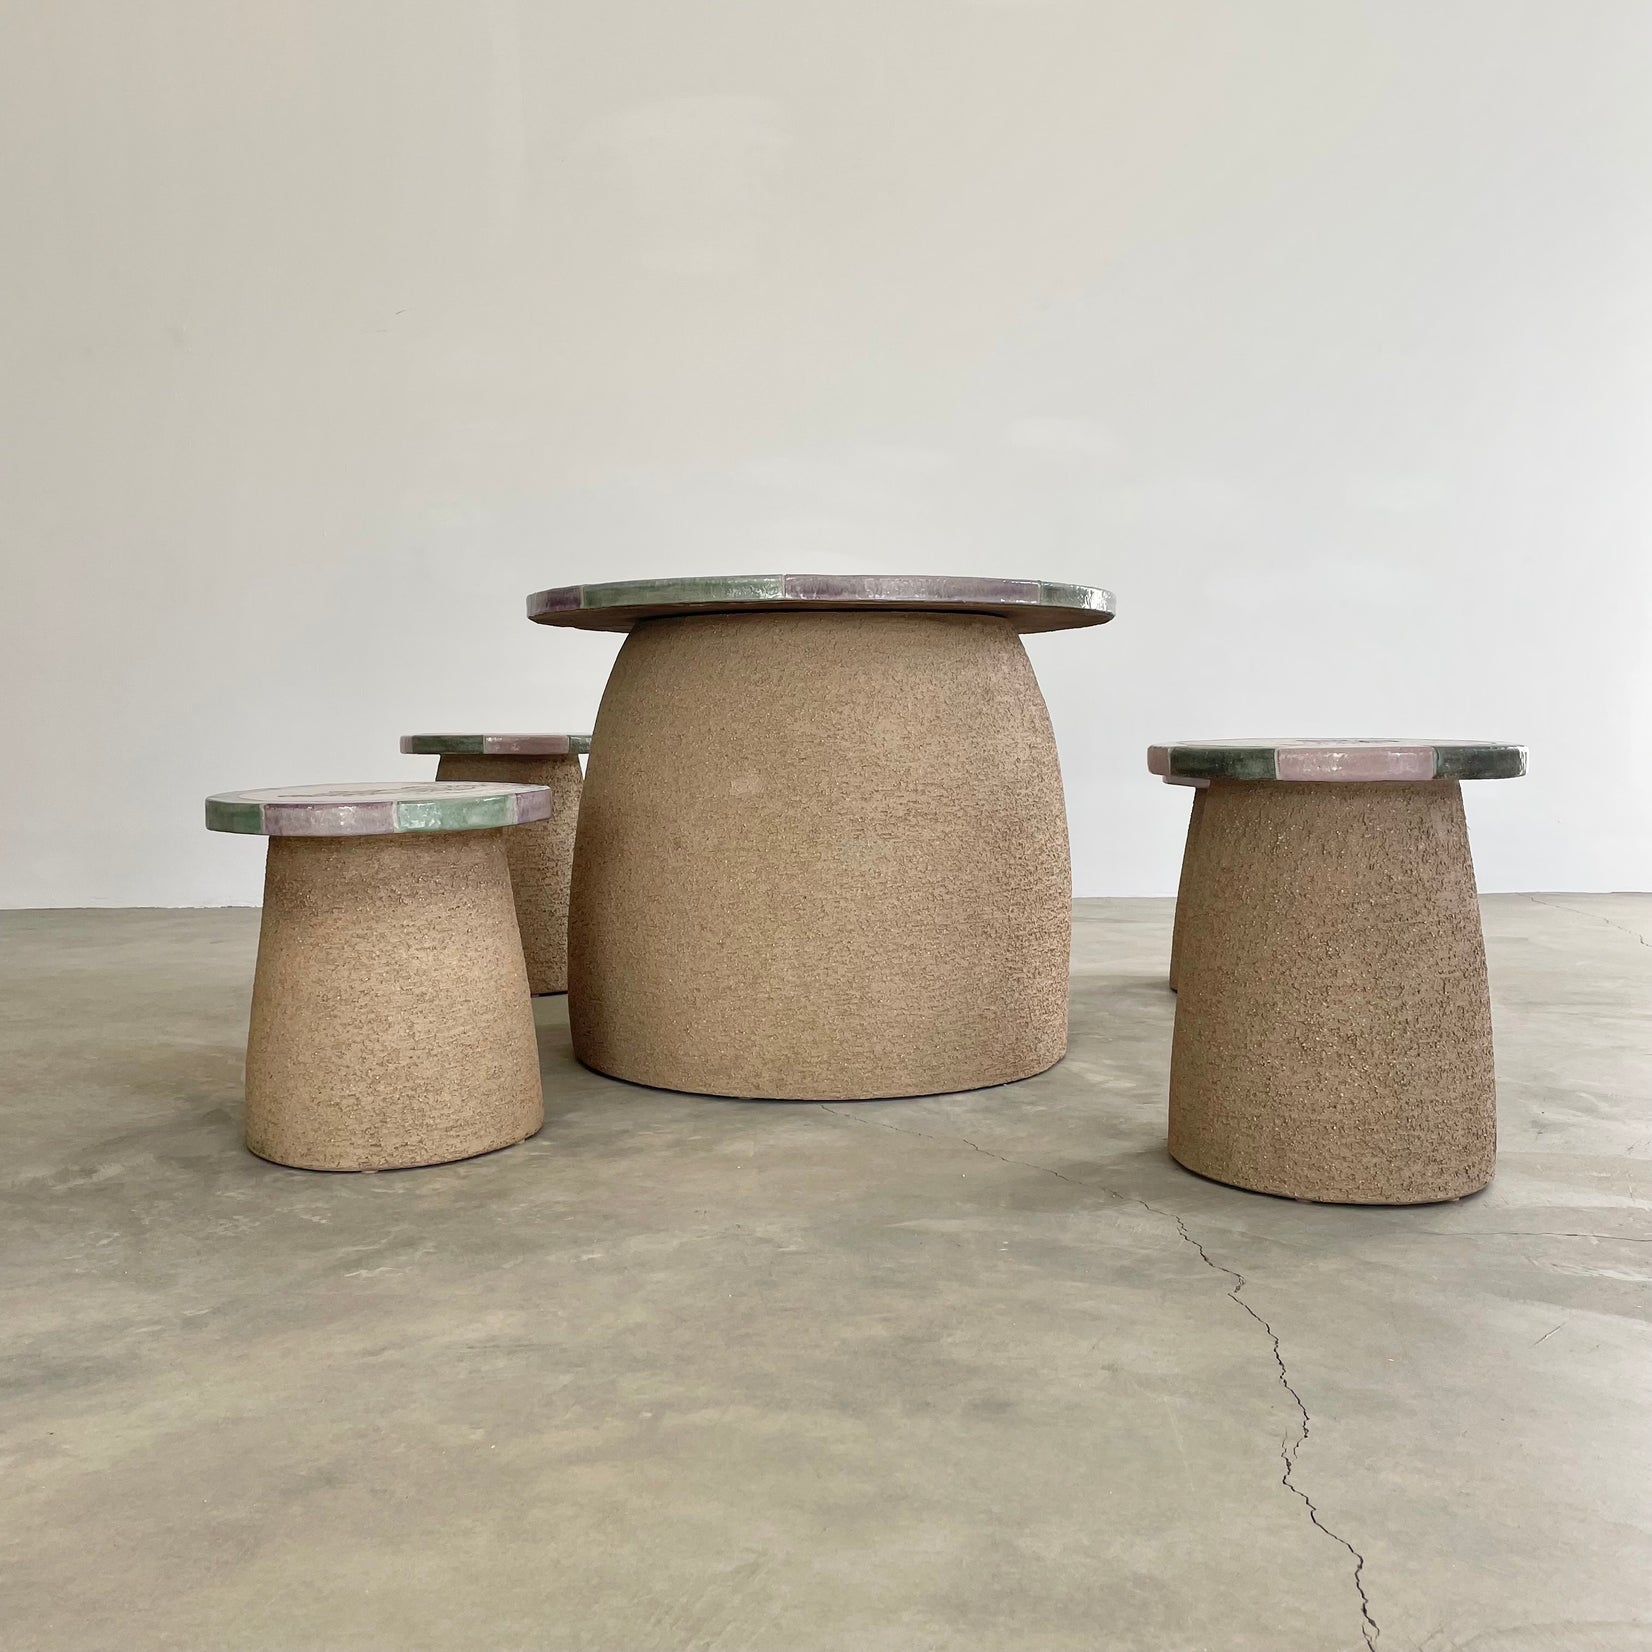 Mushroom Table and Stools by Stan Bitters for Hans Sumpf Company, USA 1970s